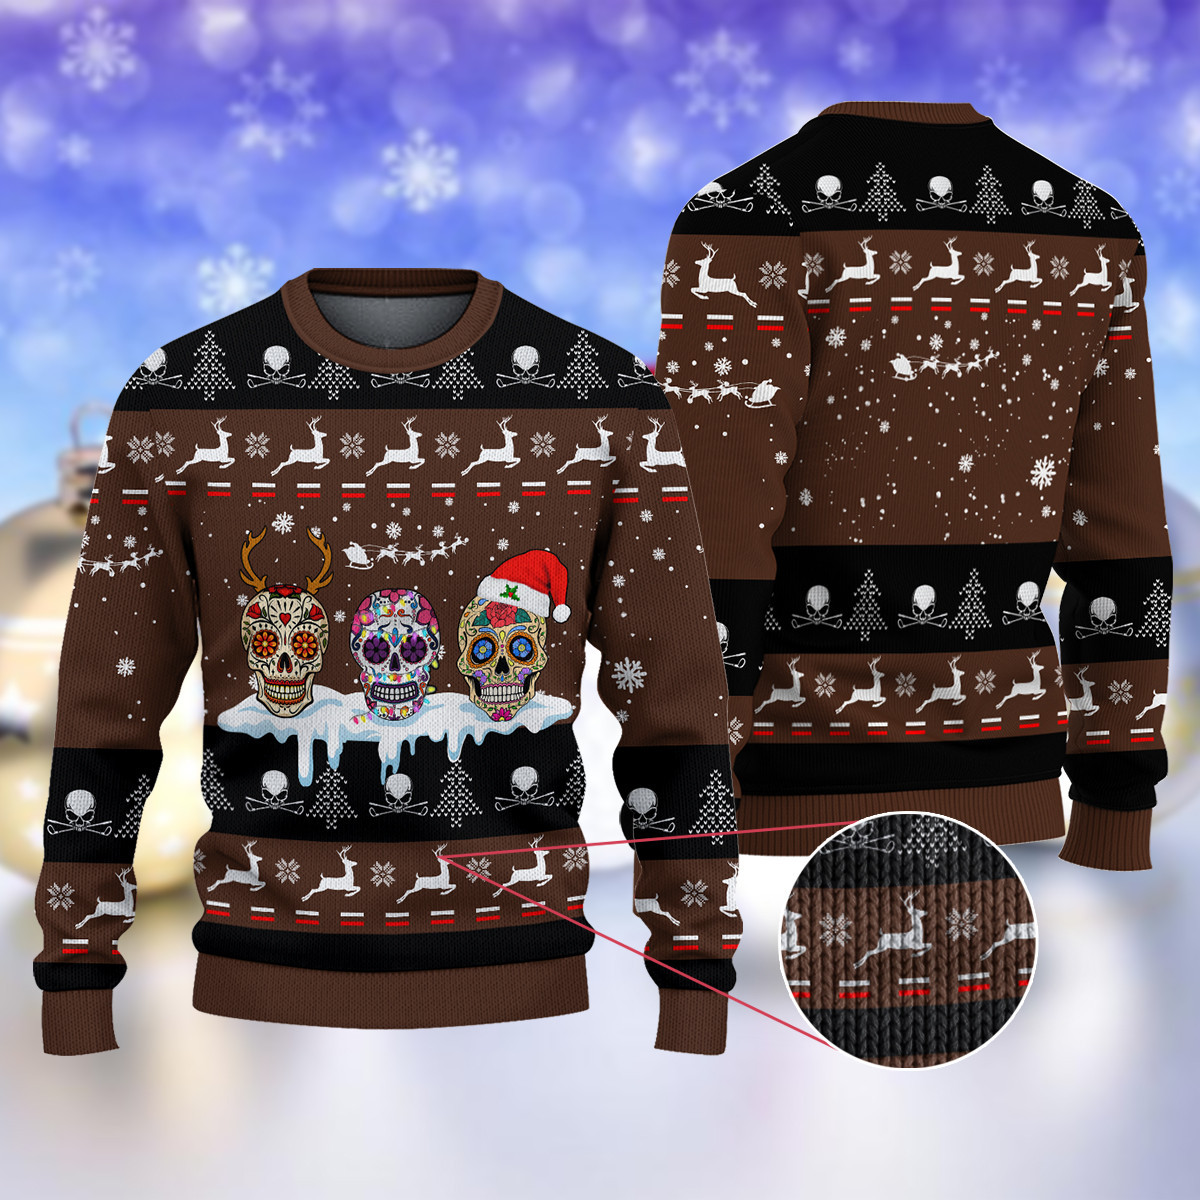 Golf Sugar Skull Ugly Brown Christmas Sweater Ugly Sweater For Men Women Holiday Sweater